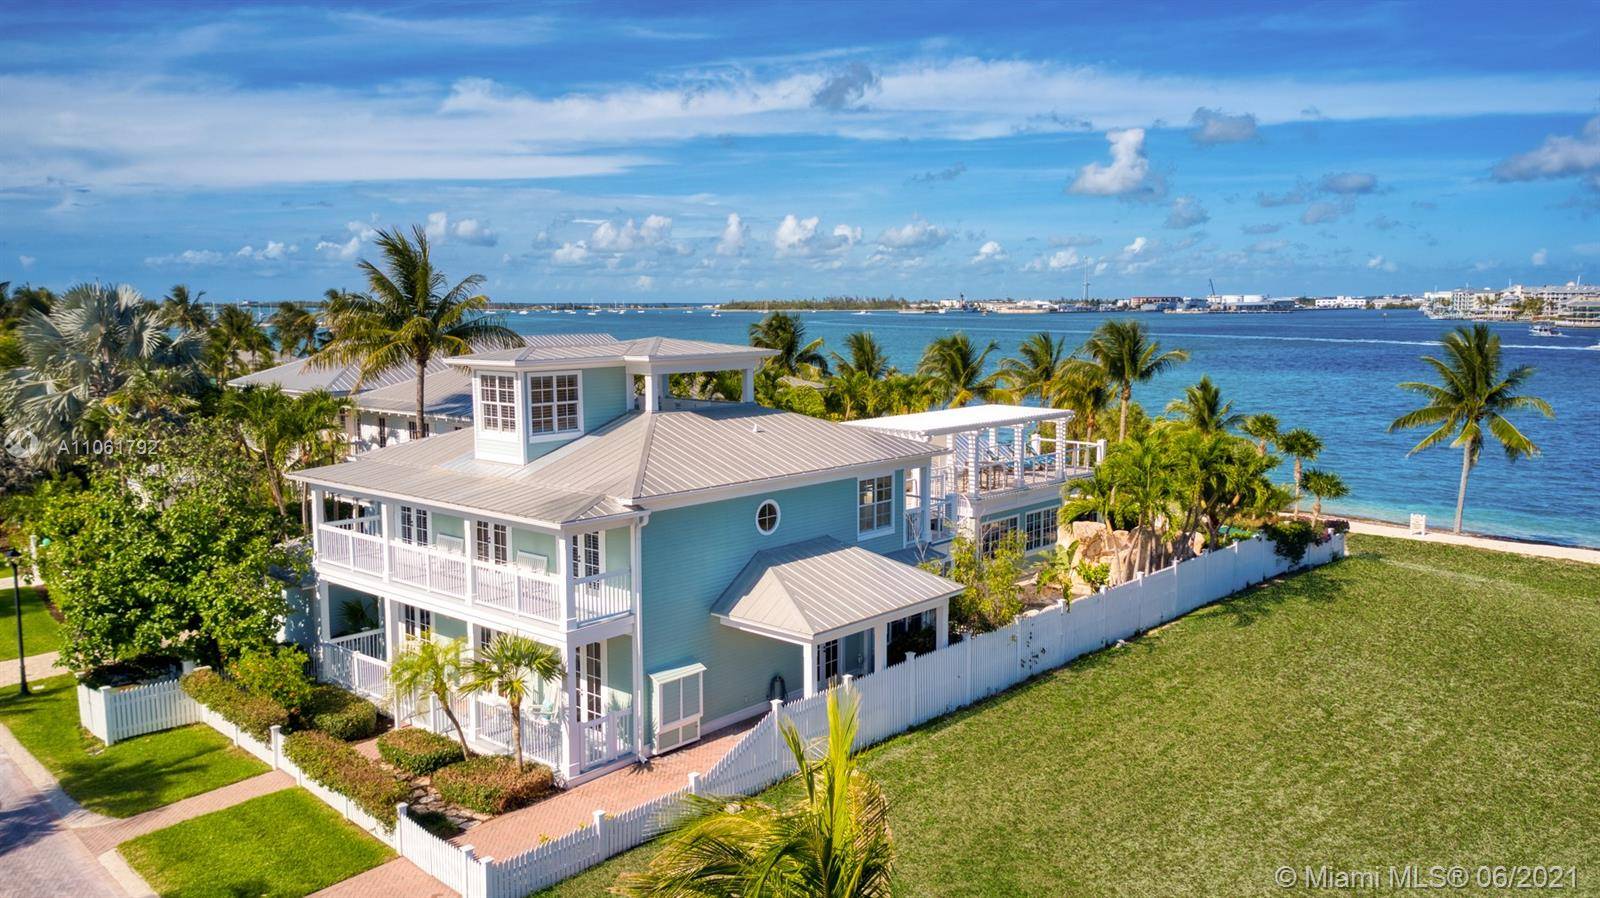 ESCAPE TO PARADSIE ! 32 Sunset Key is an oceanfront property with private beach, harbor views facing Mallory Square.